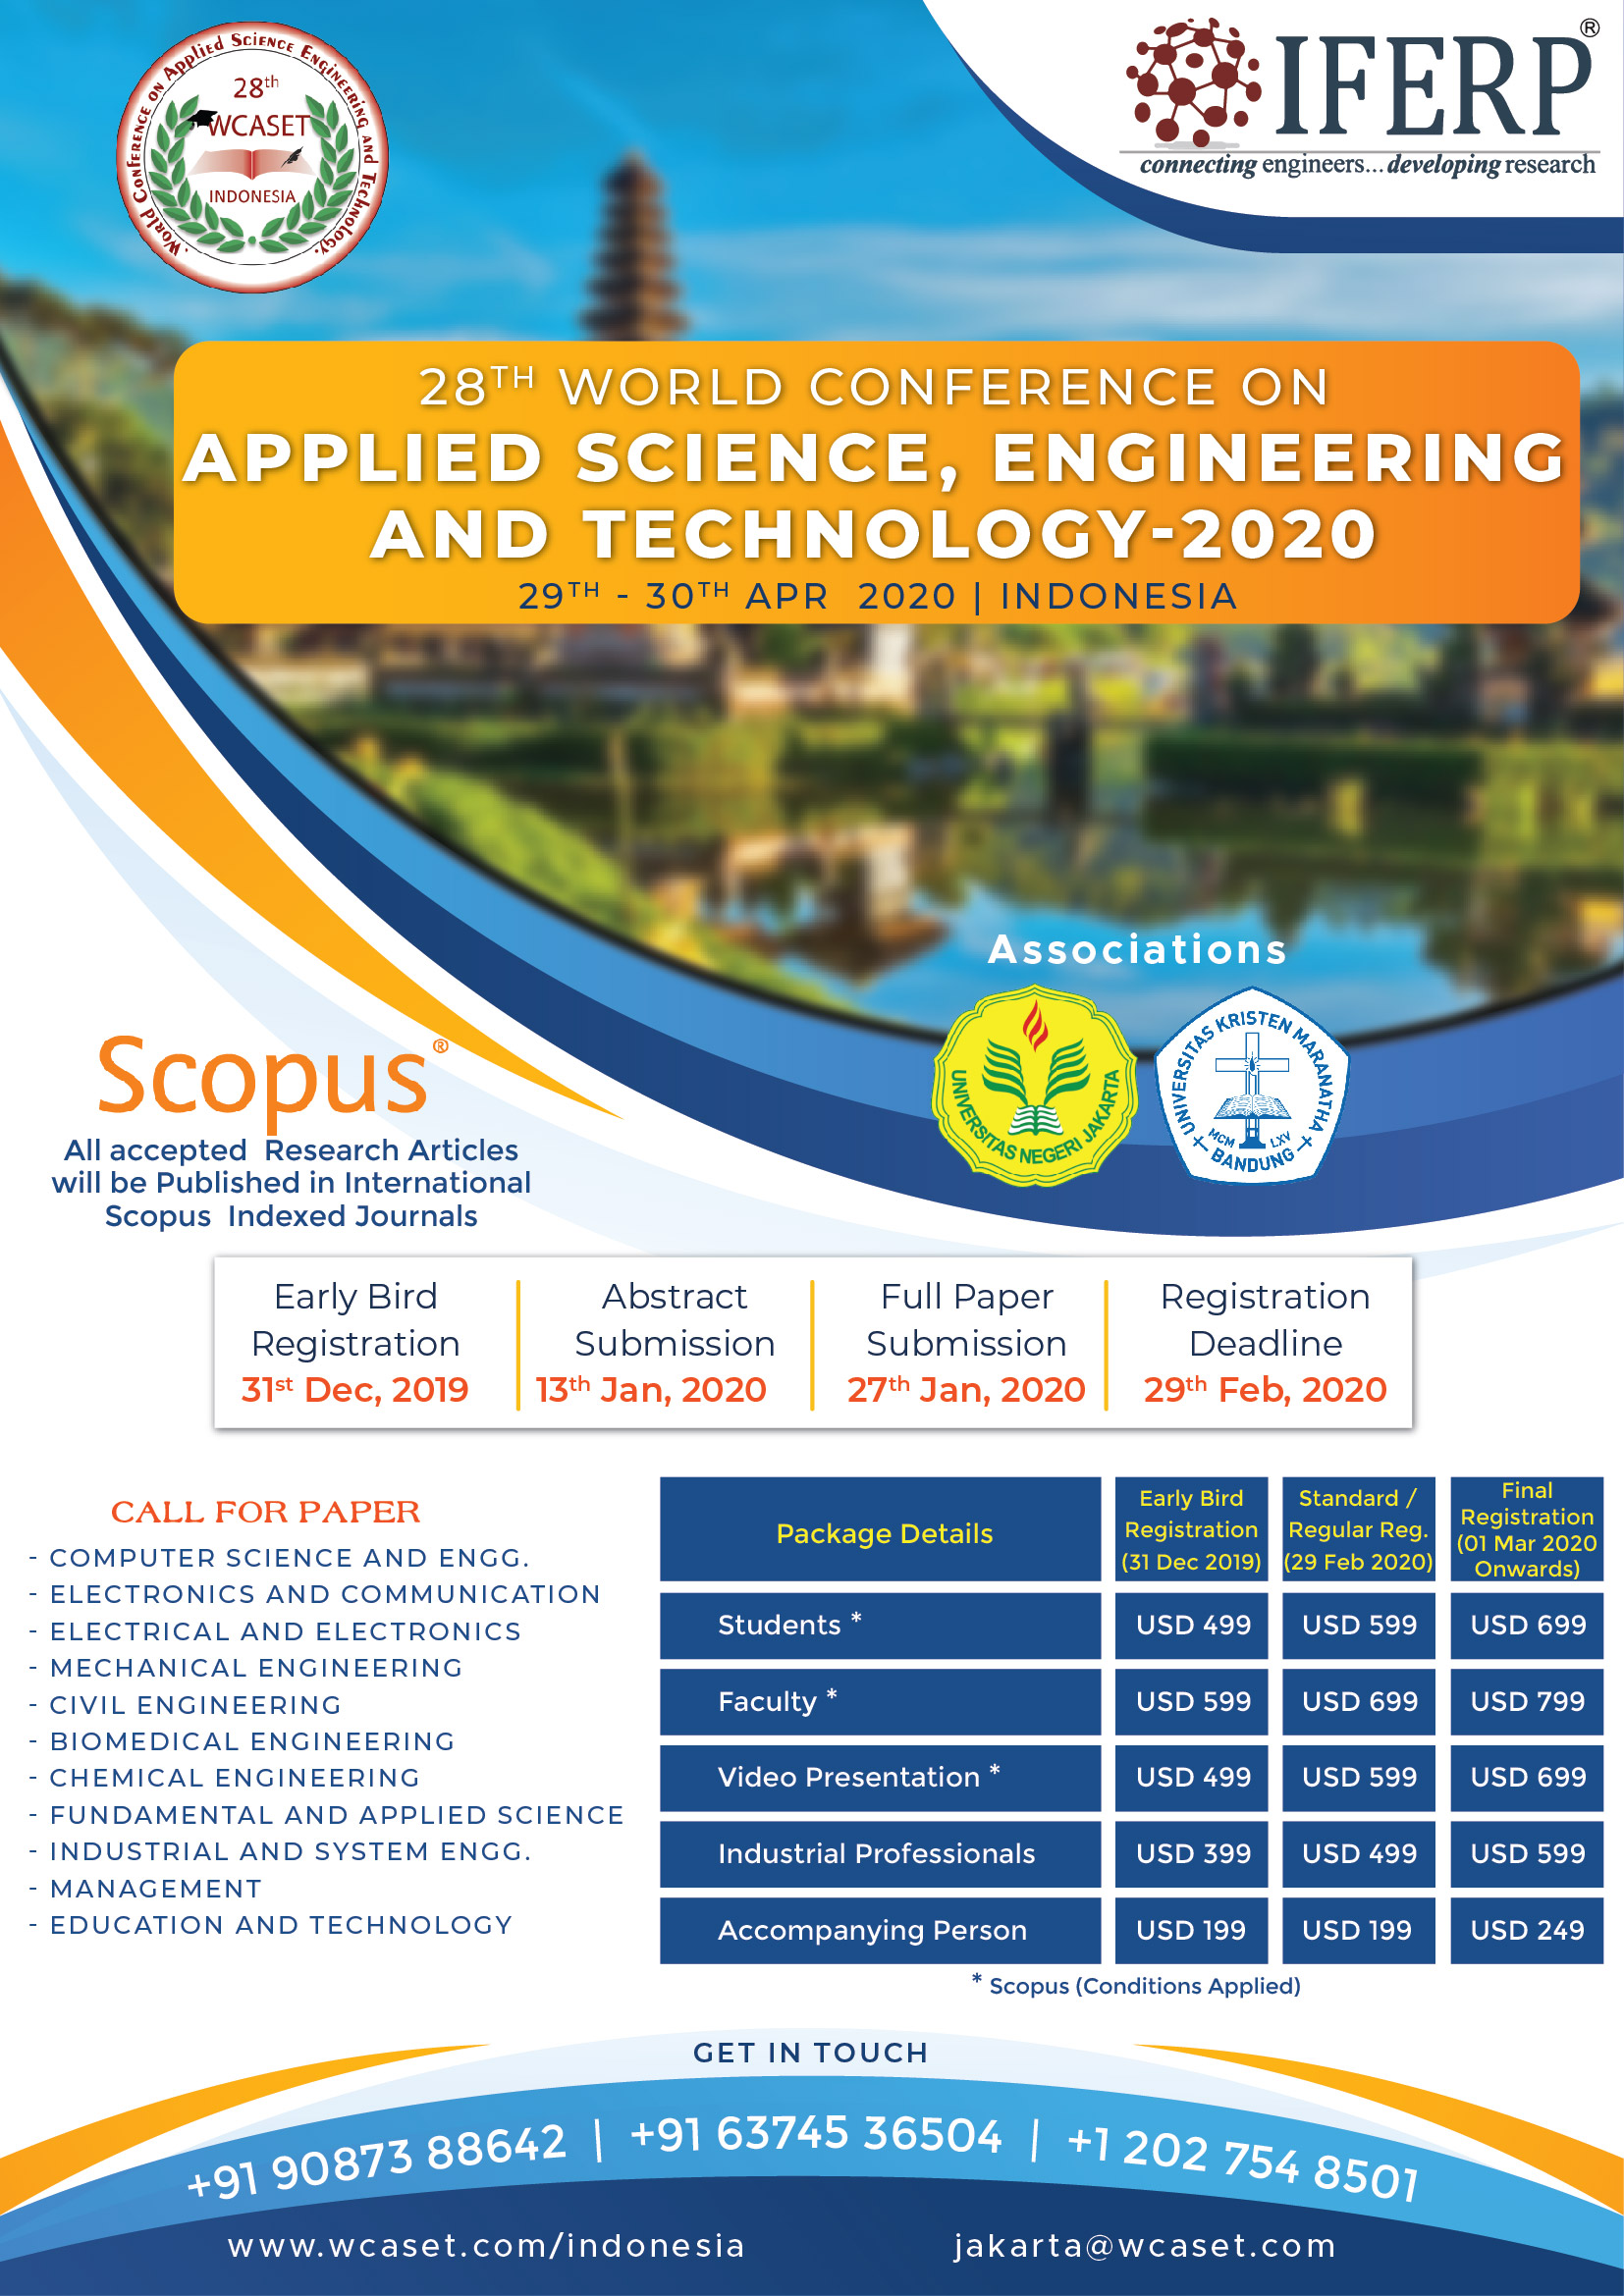 28th World Conference on Applied Science,Engineering and Technology, Central Jakarta, Jakarta, Indonesia